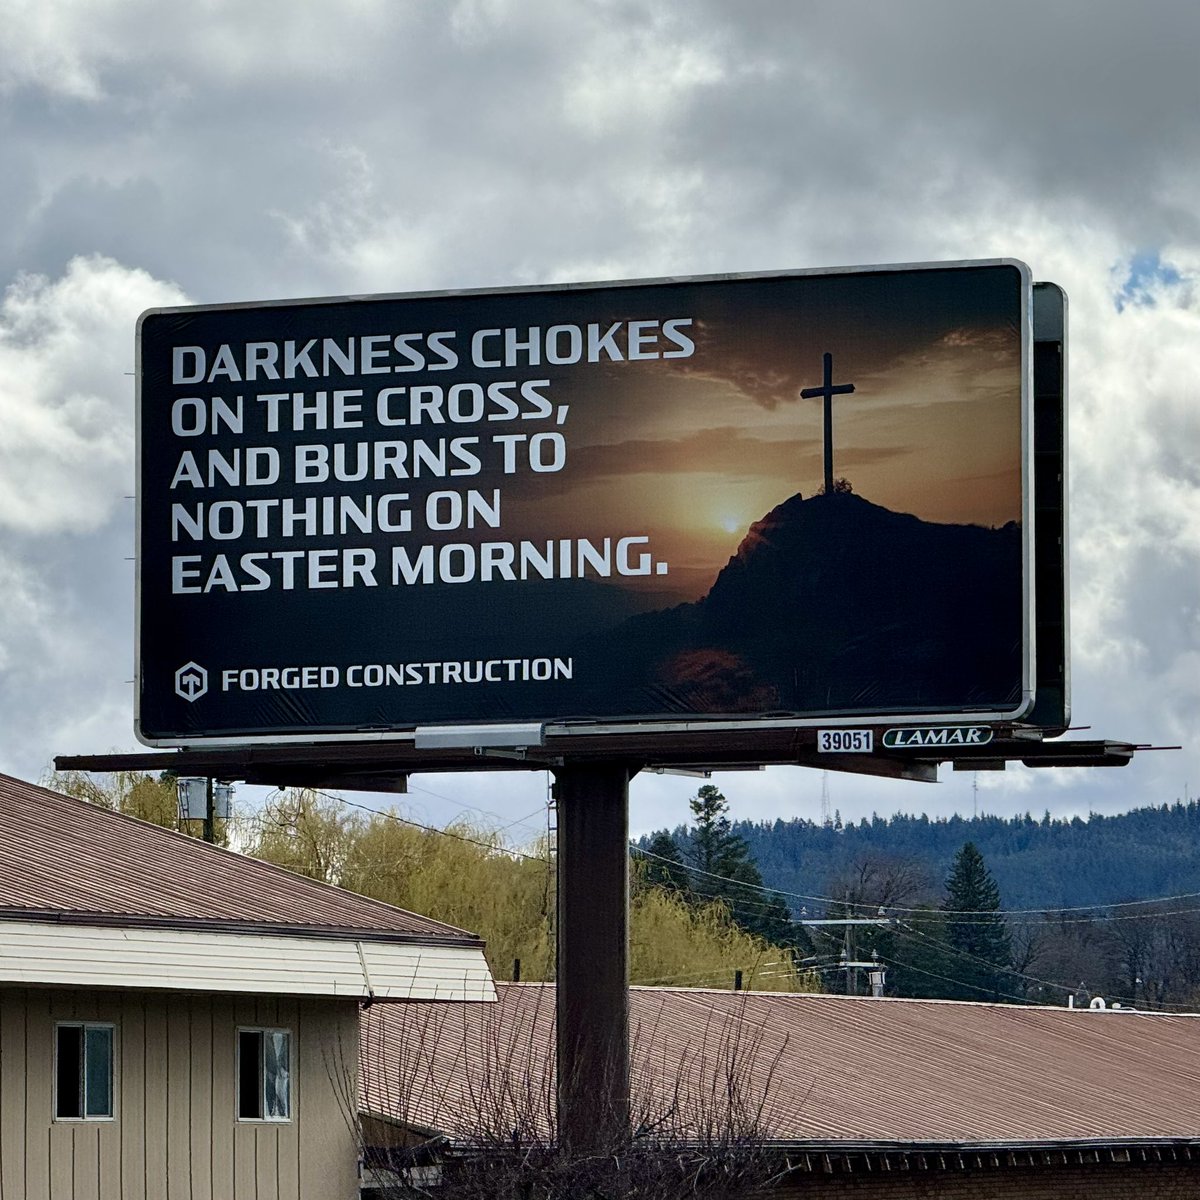 Billboard coming into @CityofMoscowId from Forged Construction. #GoodFriday #Easteriscoming #MoscowIdaho #ChristisRisen